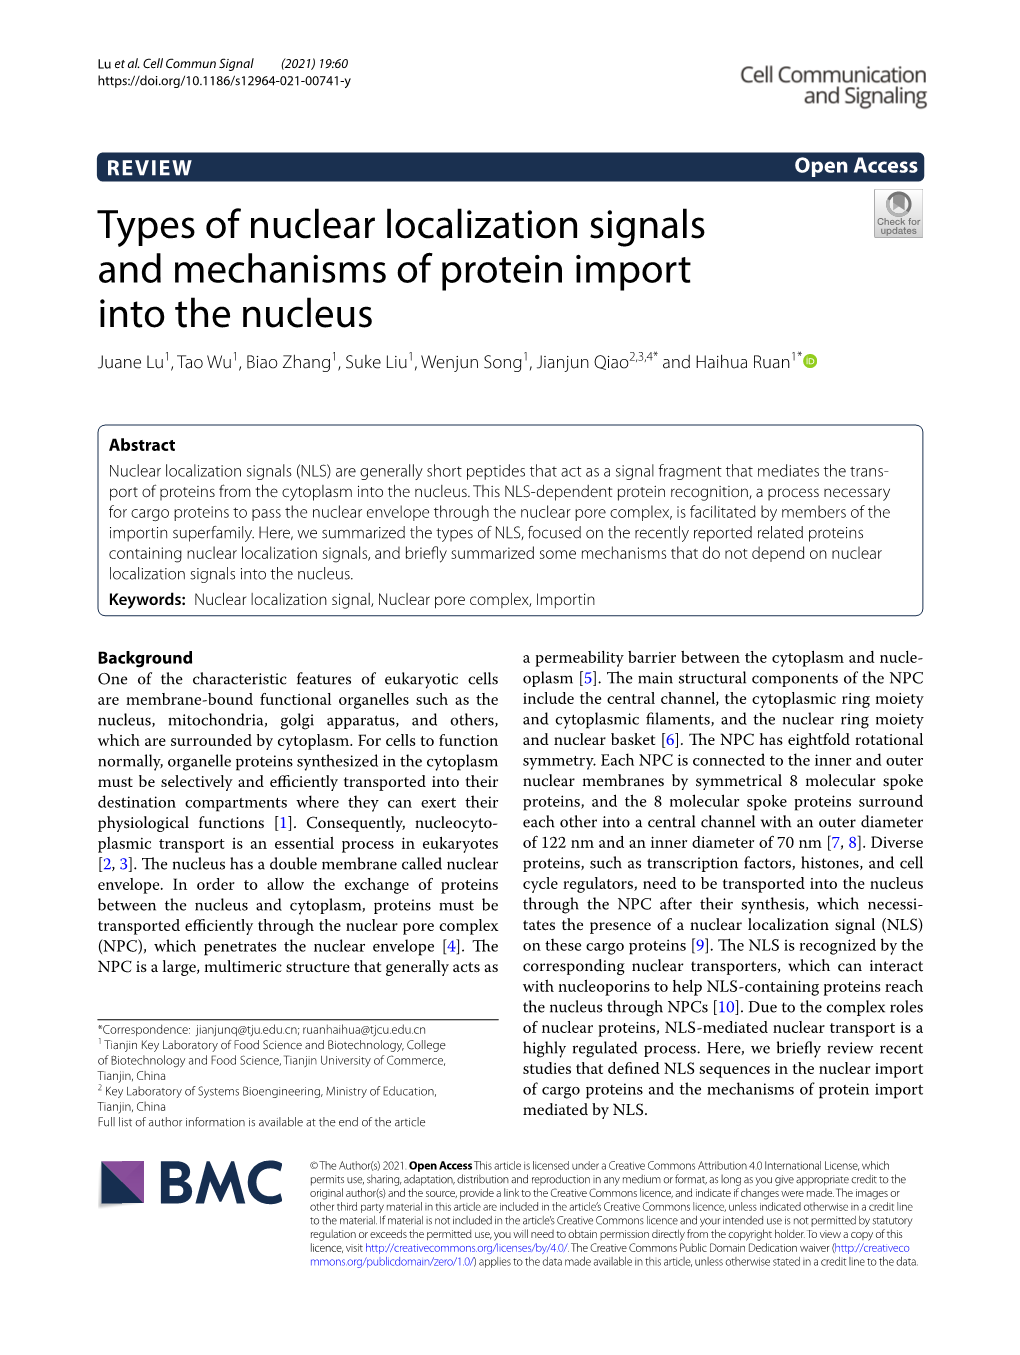 Types of Nuclear Localization Signals and Mechanisms of Protein Import